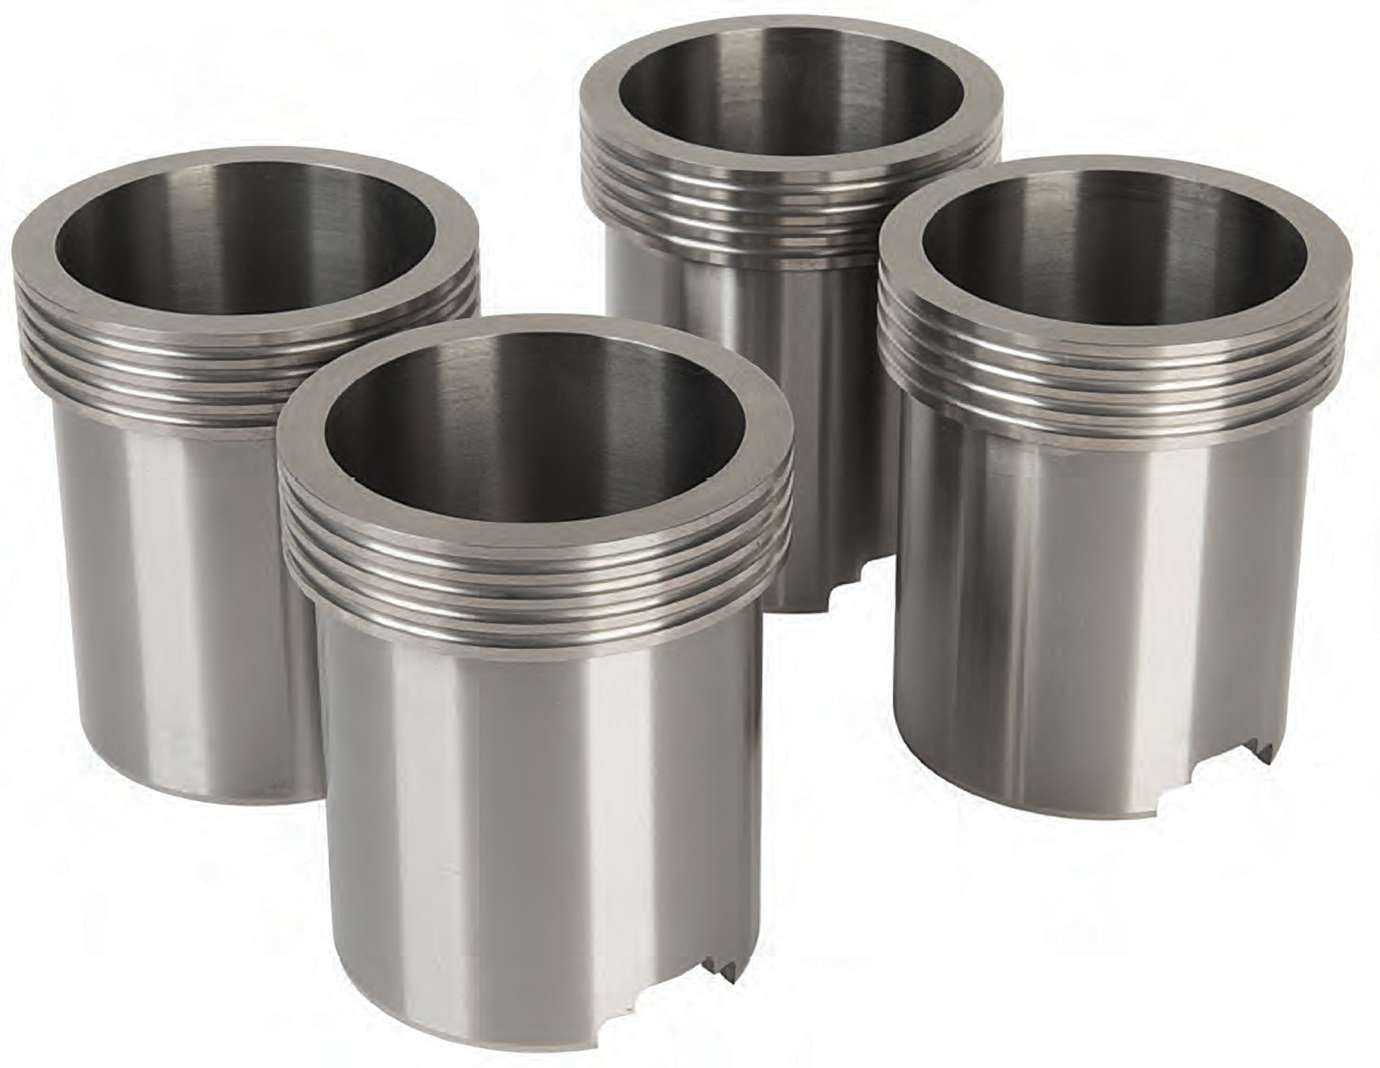 L.A.SLEEVE amphibious cylinder liners